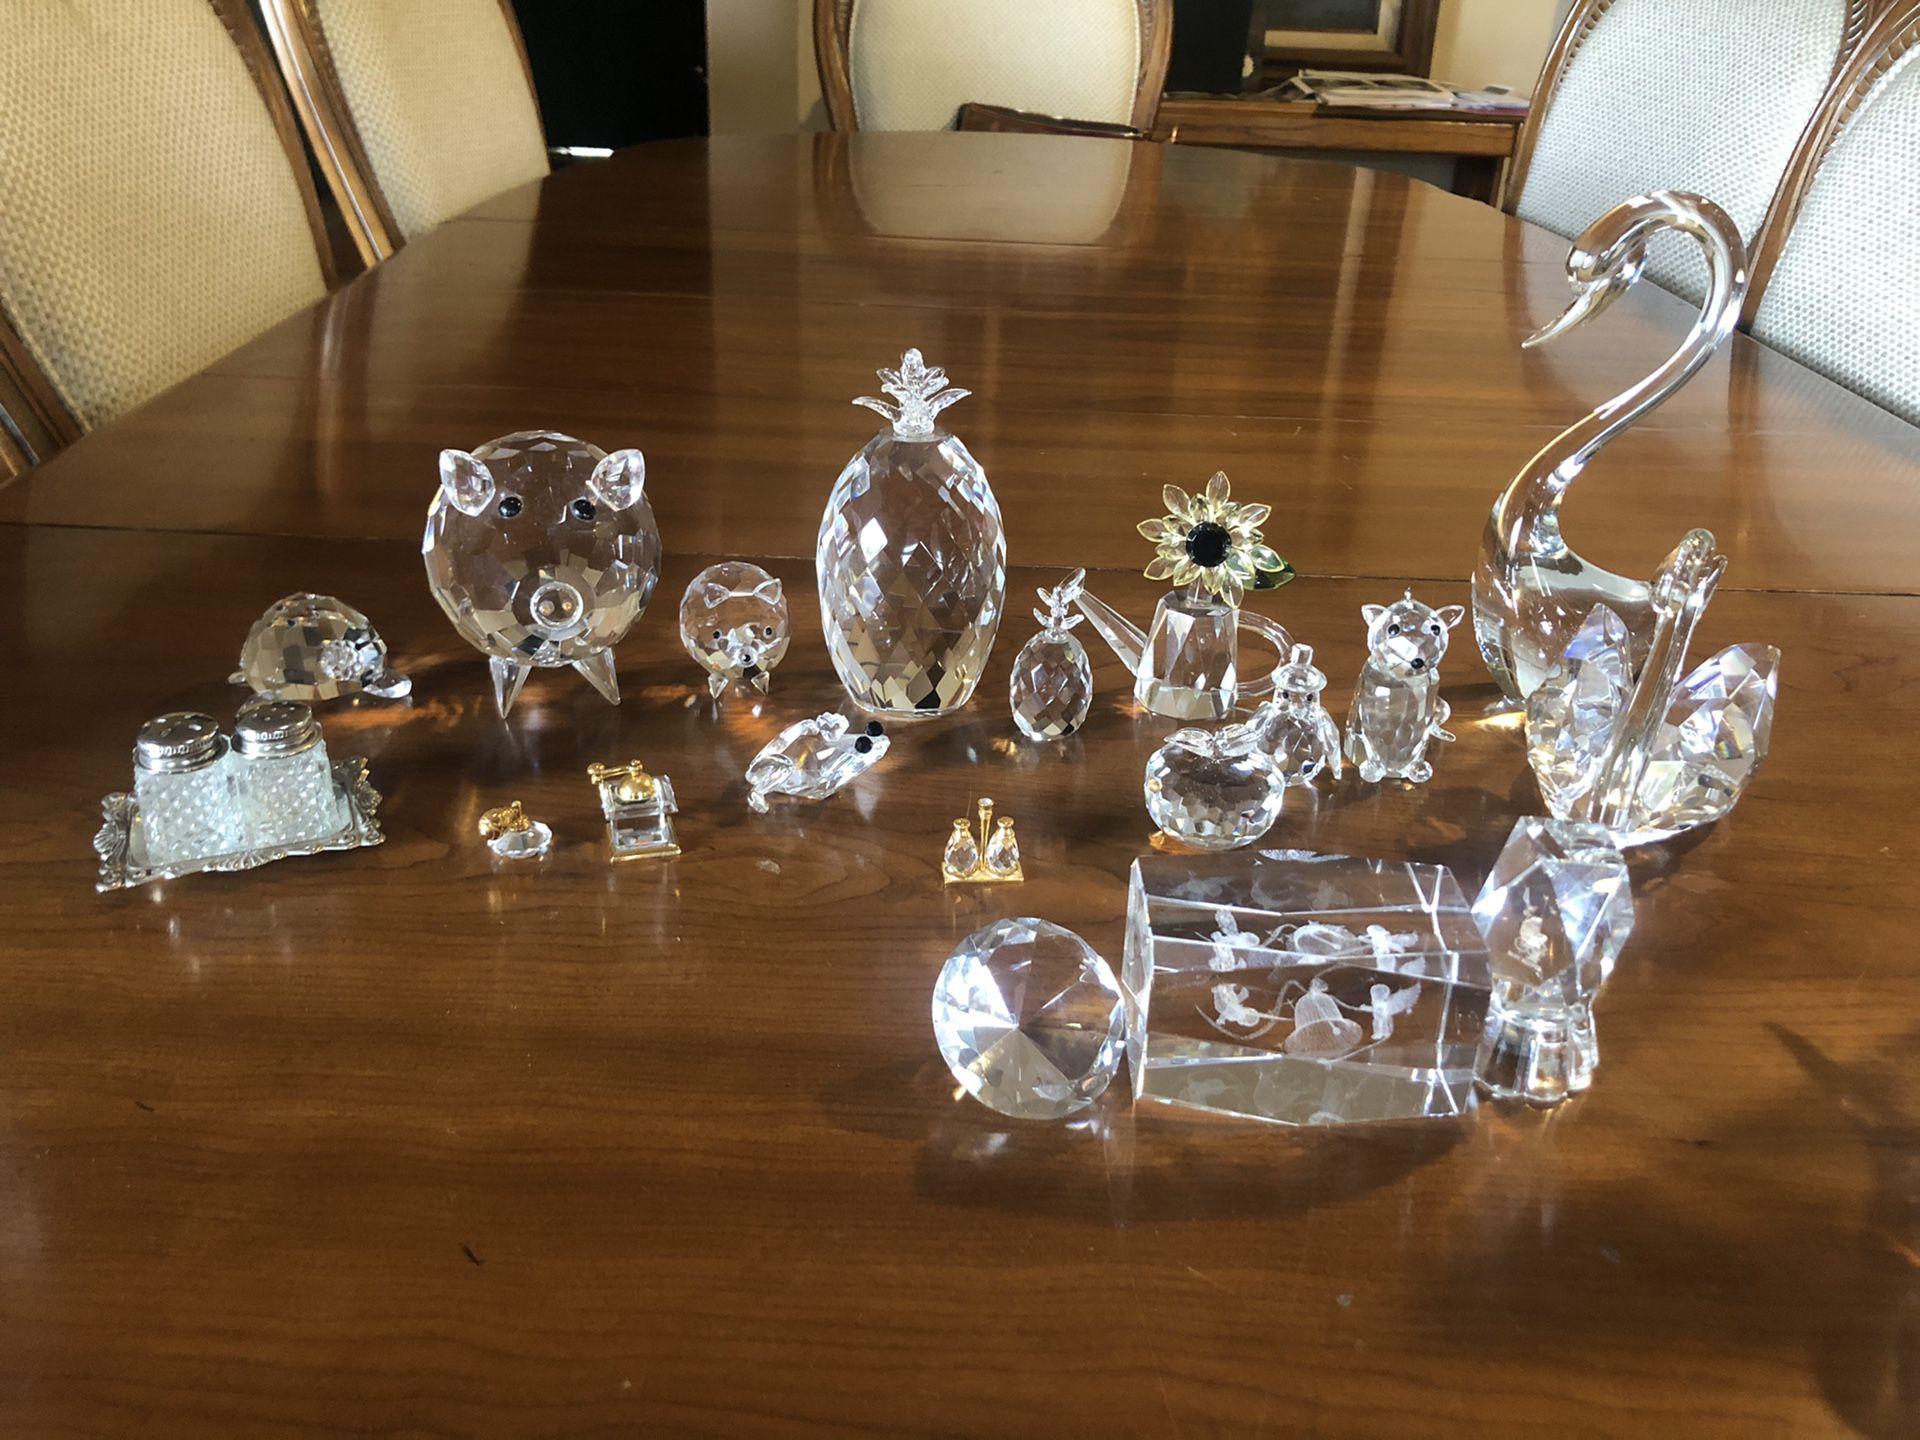 All for $20 must pick up today 4/29 - Crystal figurine statue collection decor art vintage boho collectibles